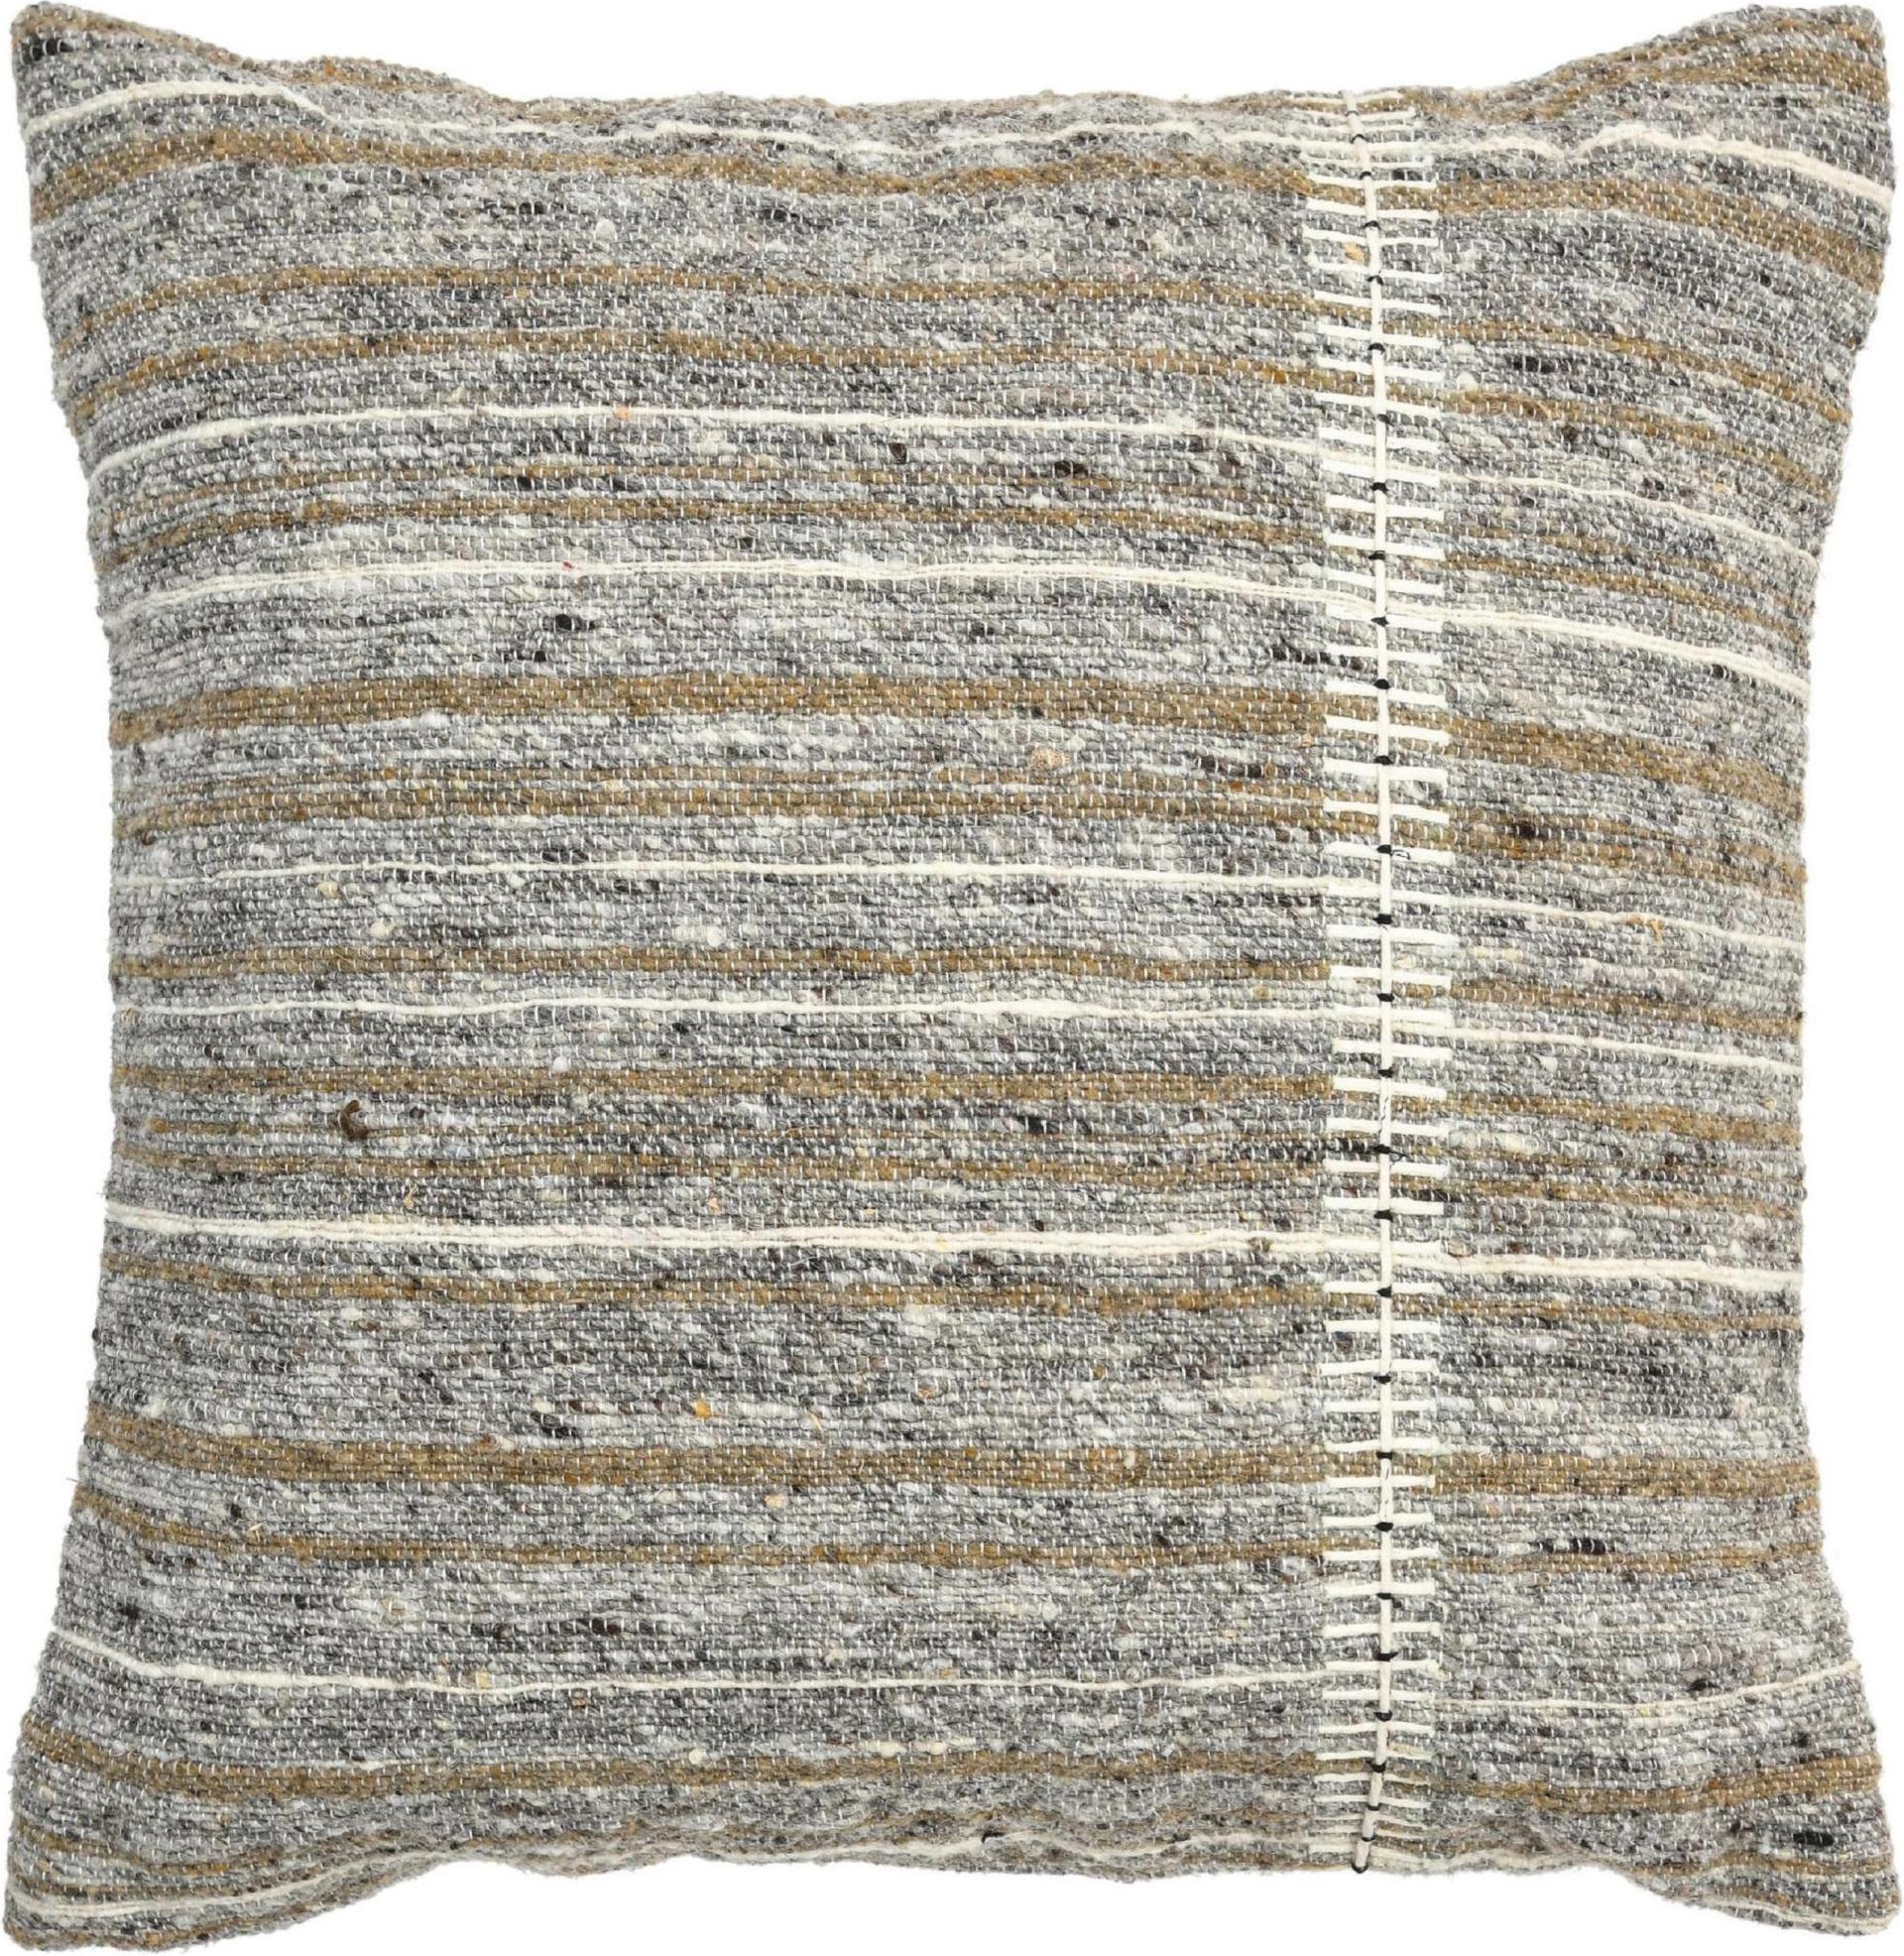 Indian Boho Chic Style Modern Wool and Cotton Pillow In Muted Tones For Sale